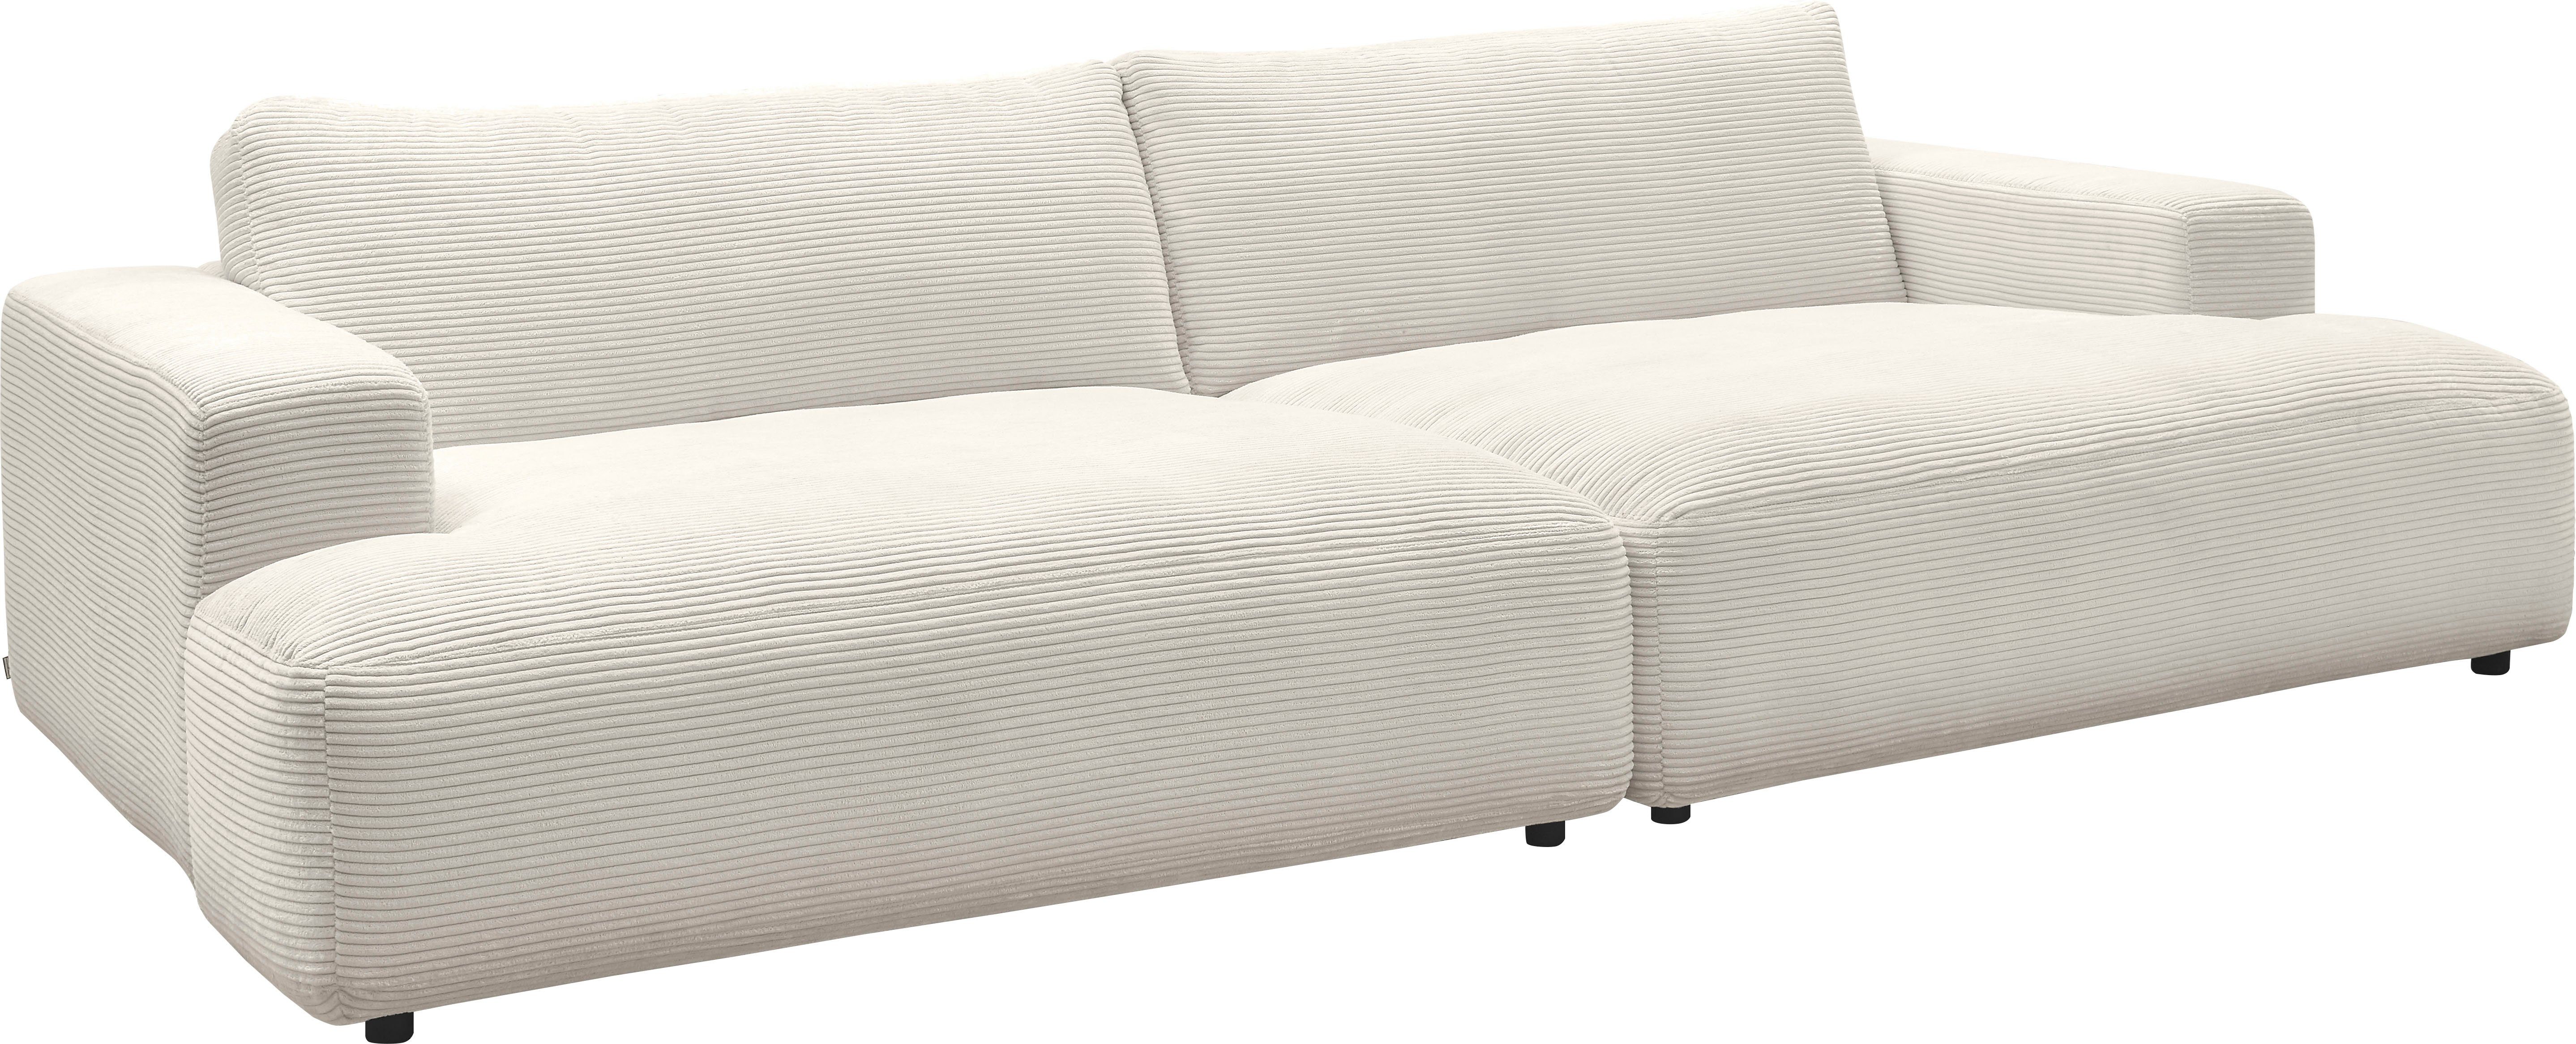 Lucia, M Loungesofa by Breite cm Cord-Bezug, GALLERY 292 Musterring branded snow